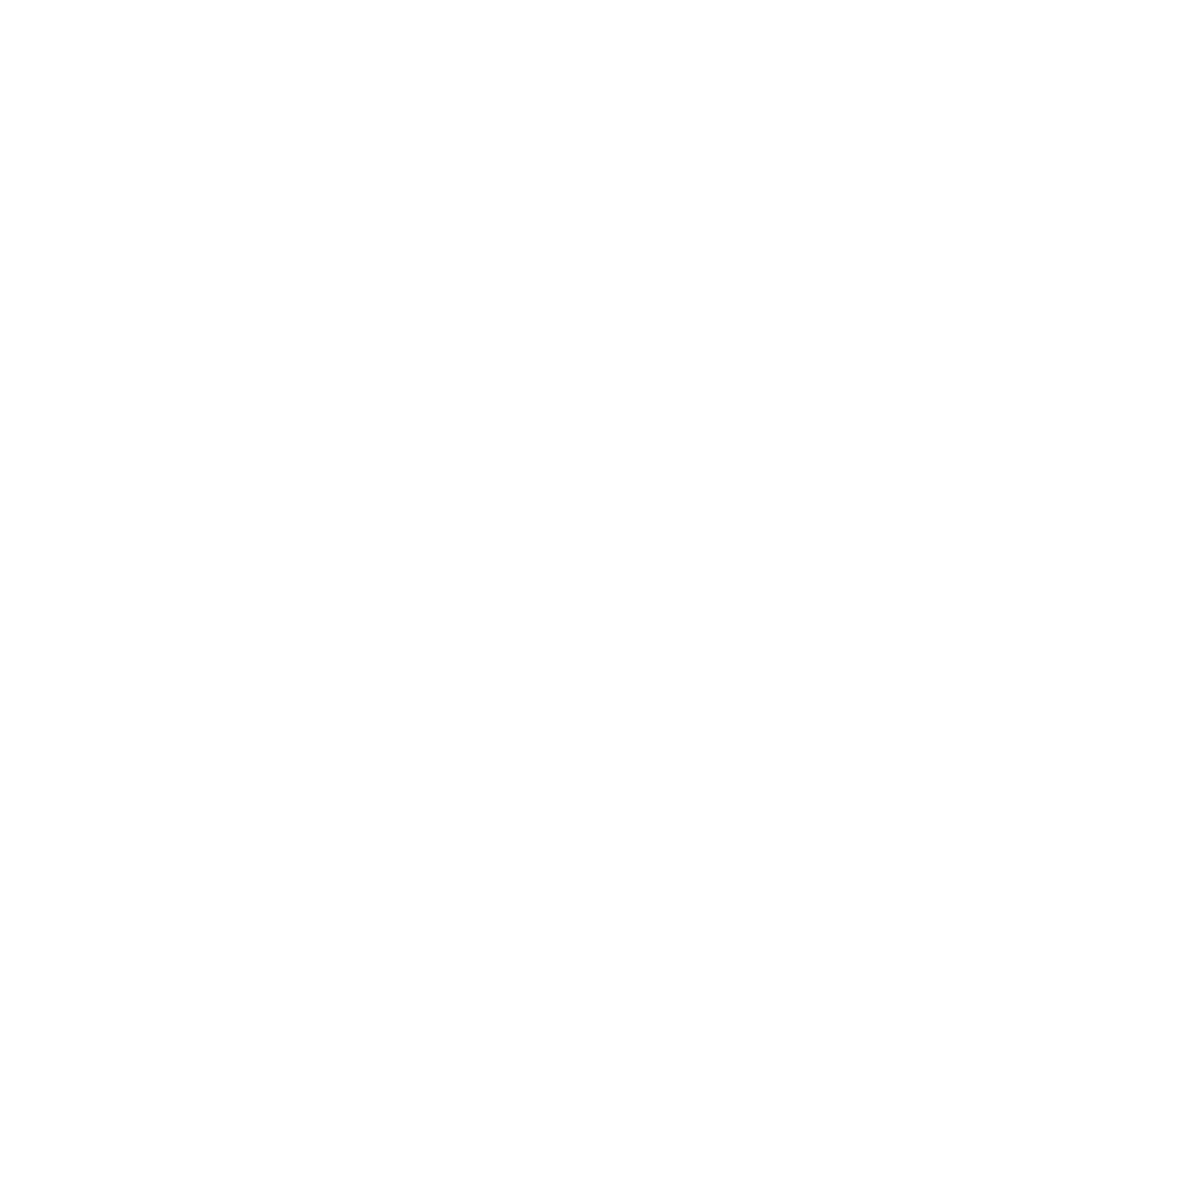 FREE TRIAL FROW